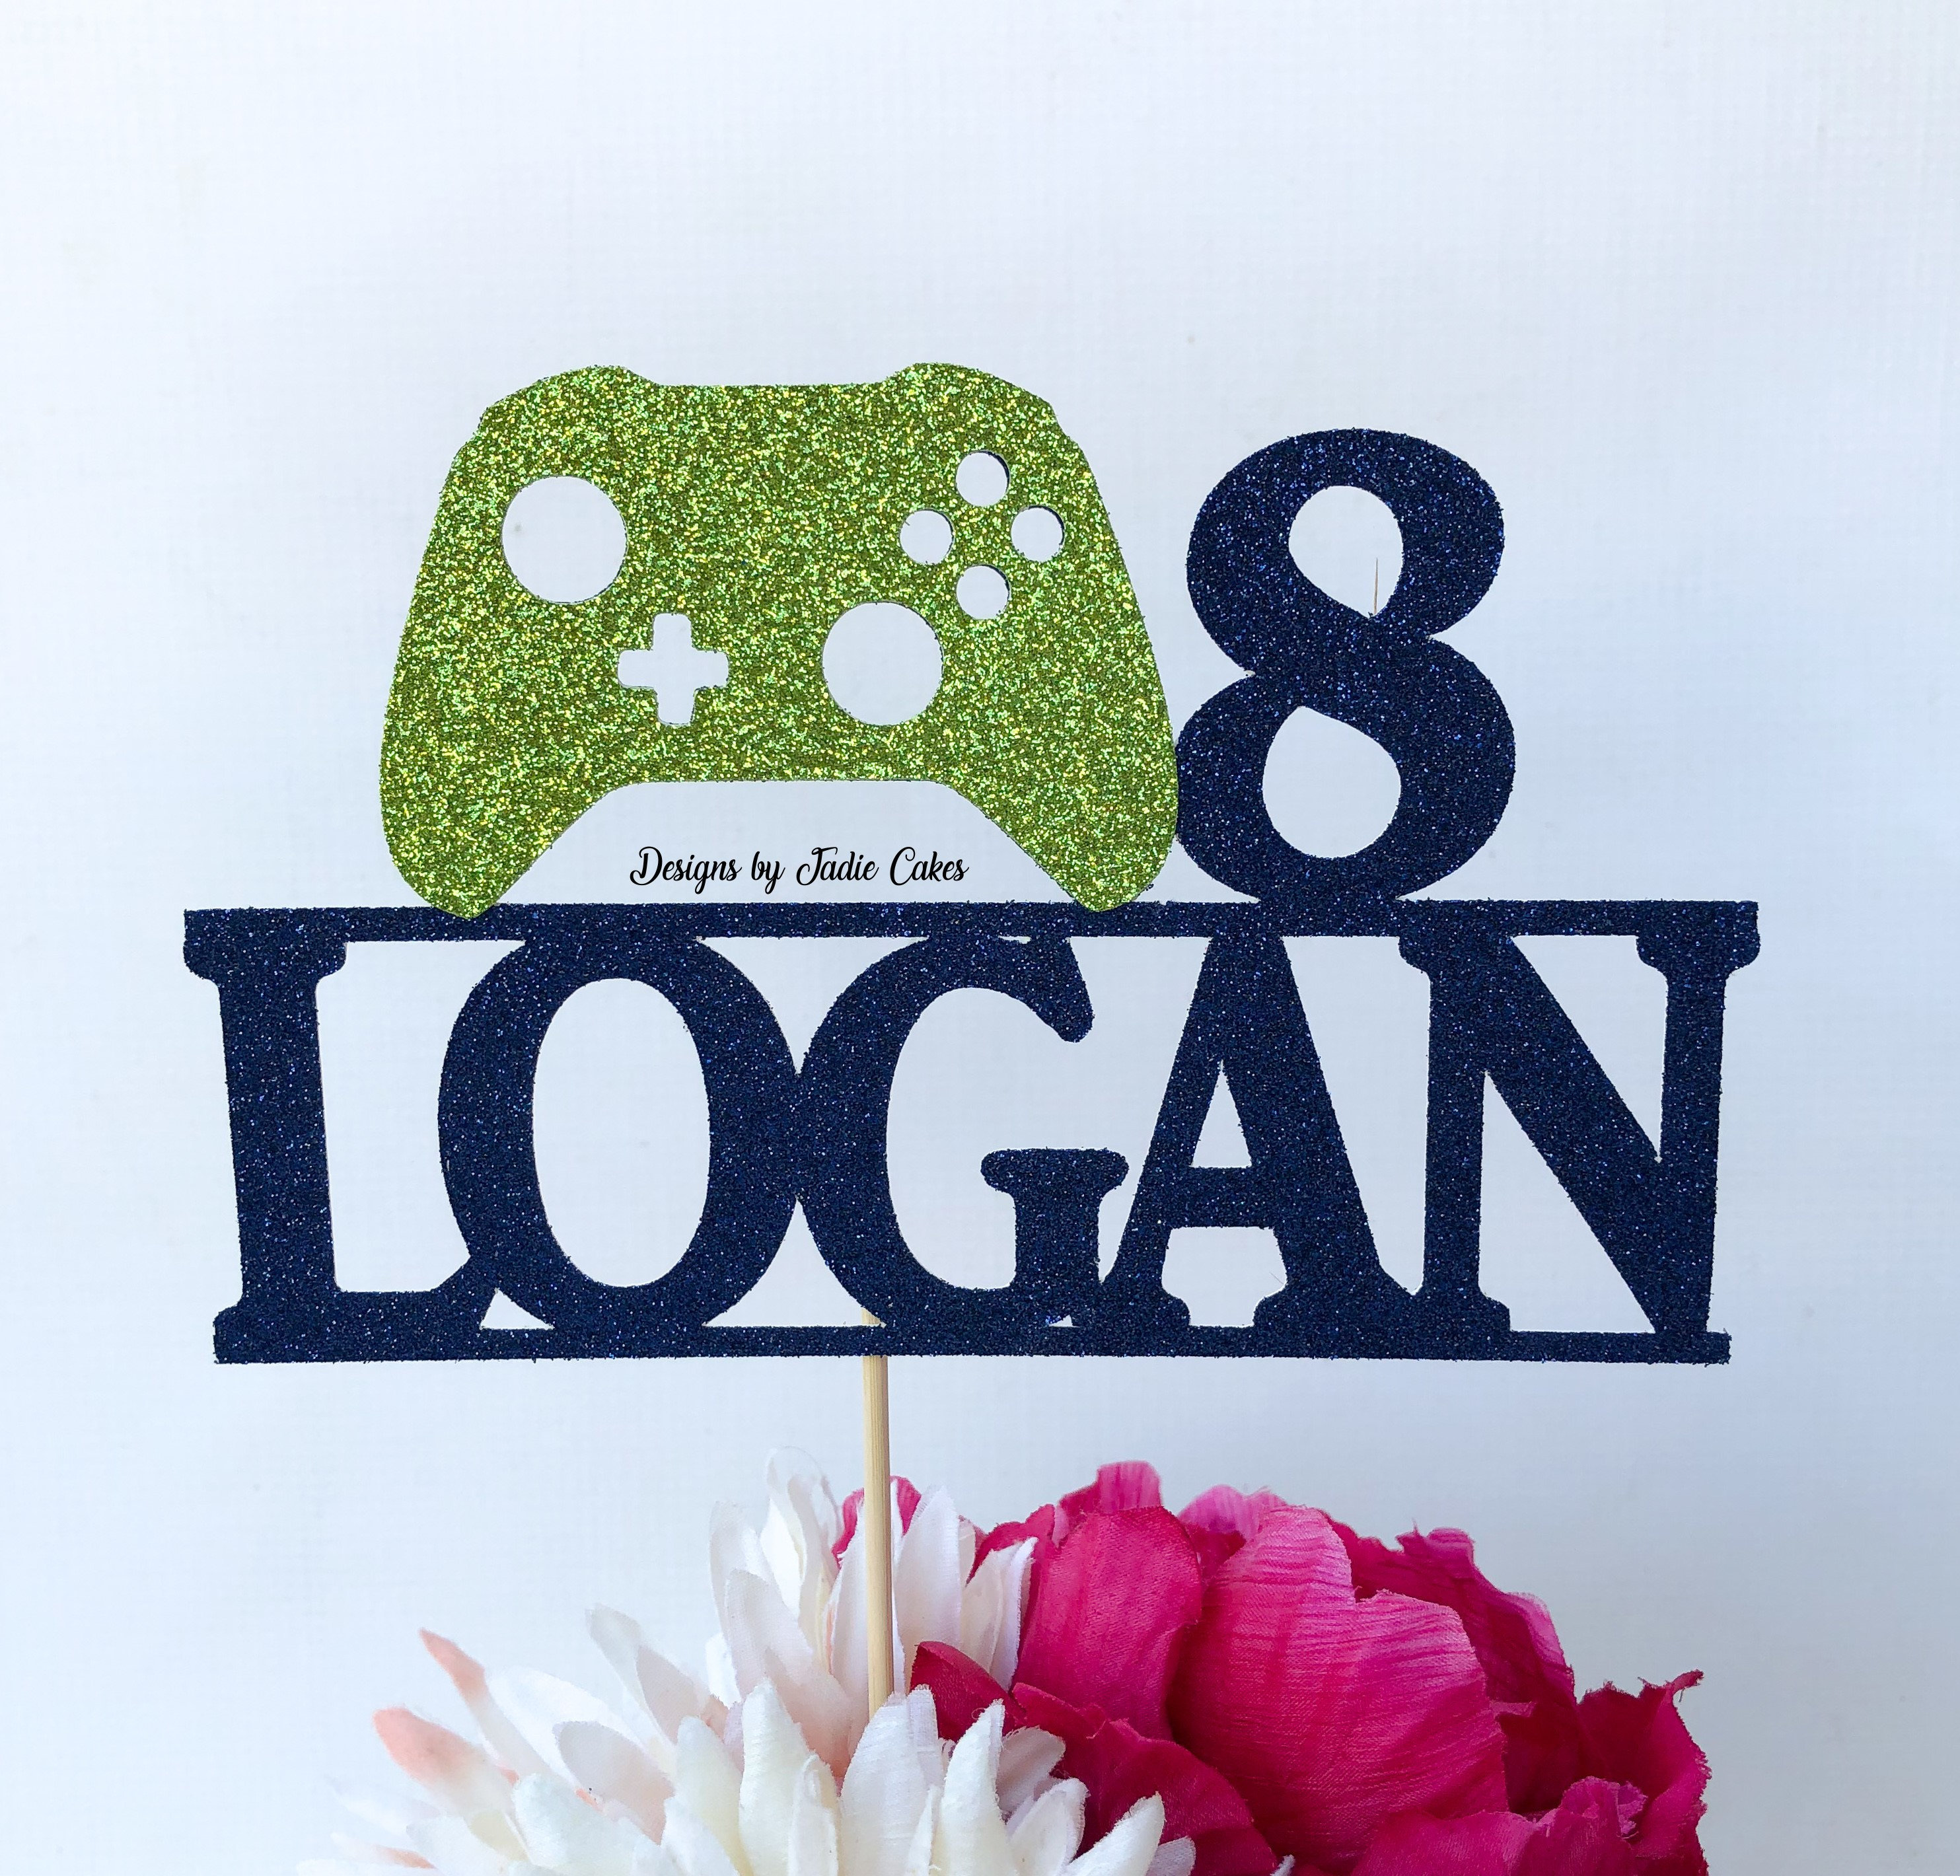 Acrylic Kids Personalised Birthday Cake Topper X-Box Controller Choose Your  Age Level